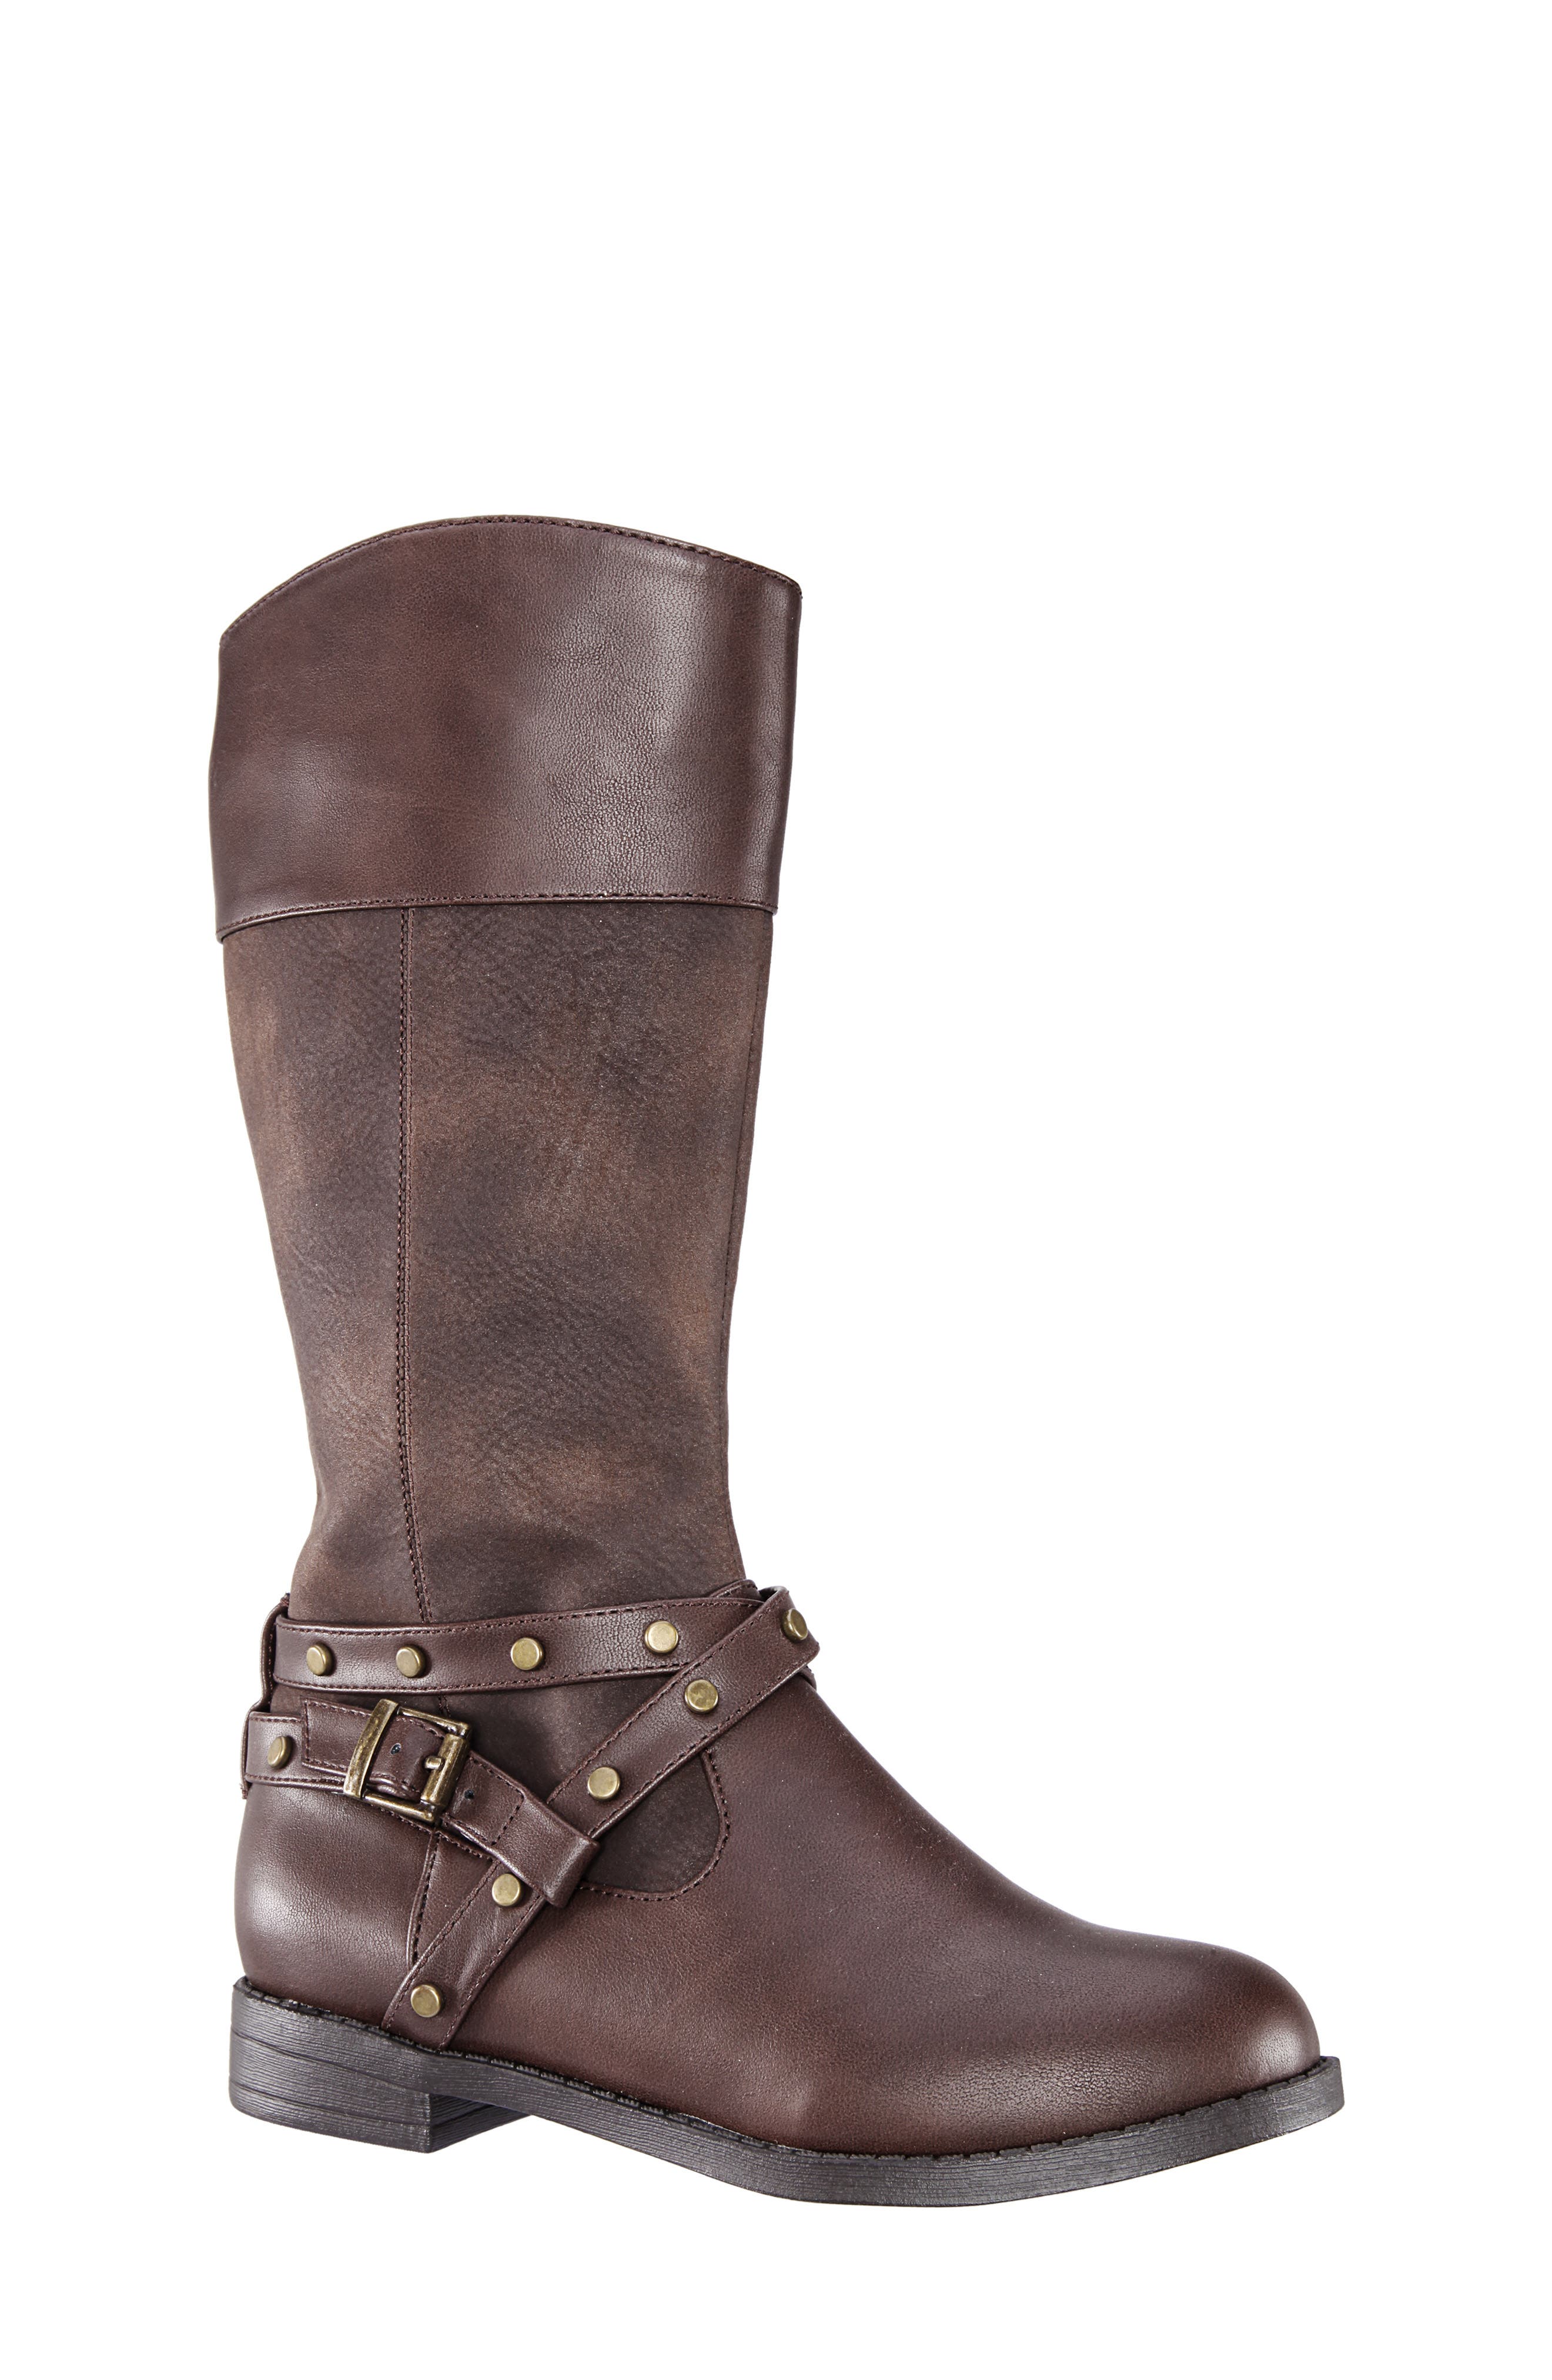 UPC 794378413028 product image for Toddler Girl's Nina Michele Boot, Size 9 M - Brown | upcitemdb.com